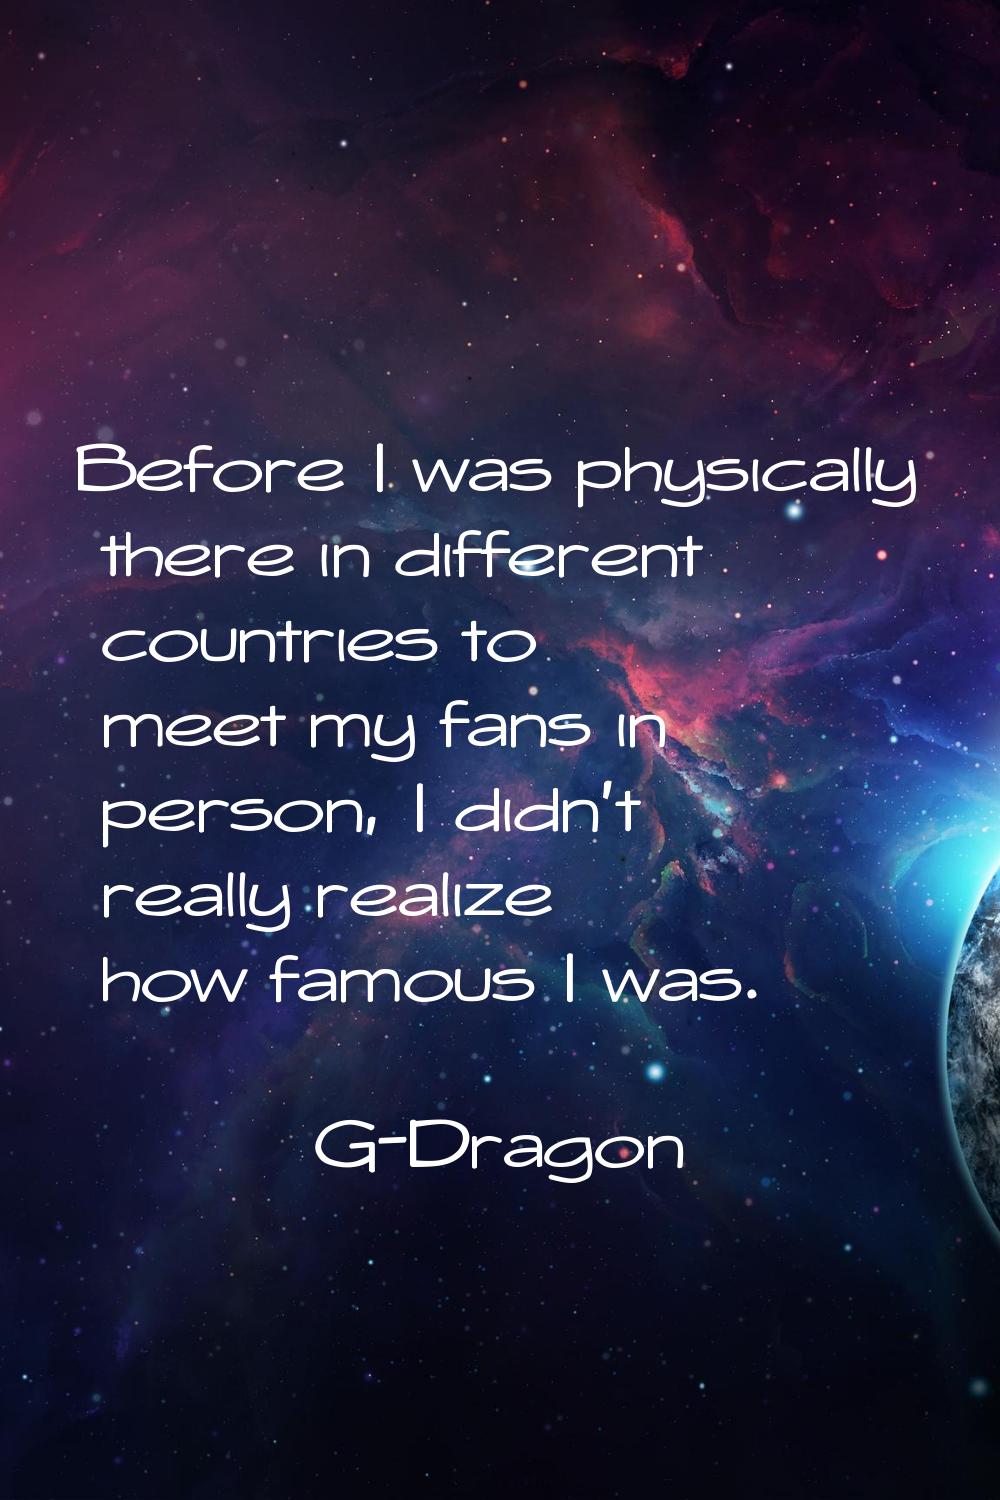 Before I was physically there in different countries to meet my fans in person, I didn't really rea